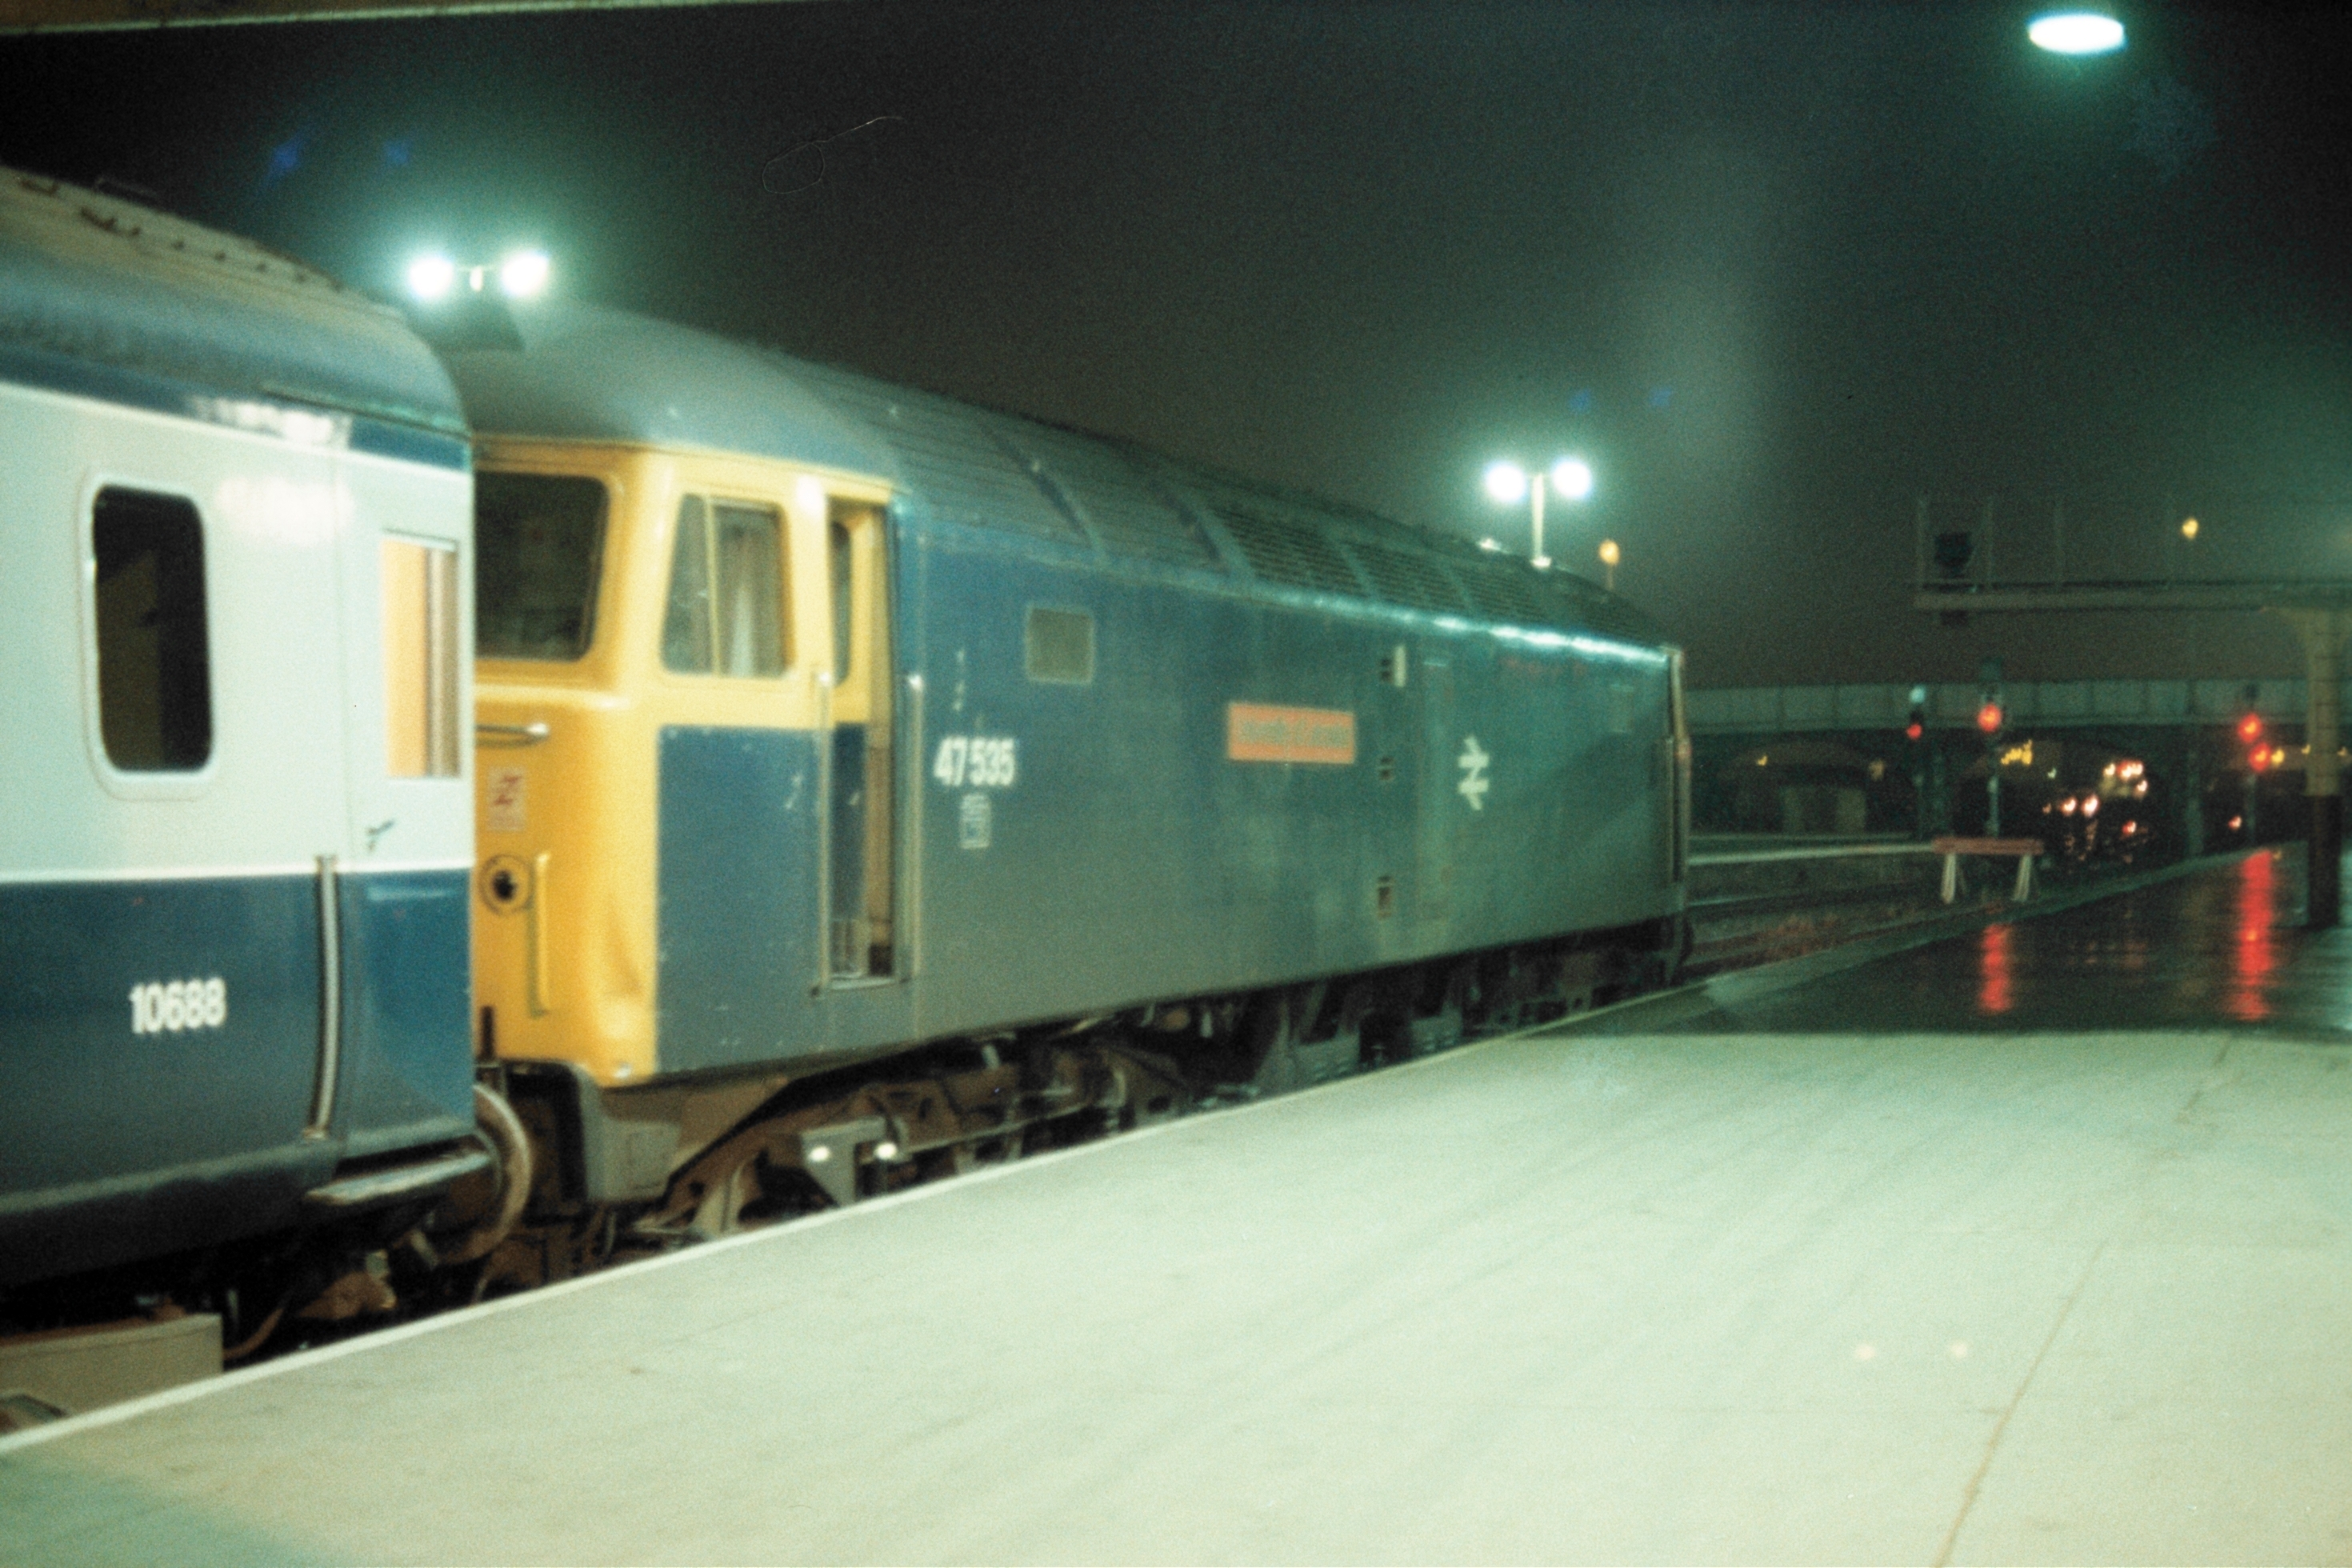 [
47535 "University of Leicester" at Perth on 3 July 1985.
        ]